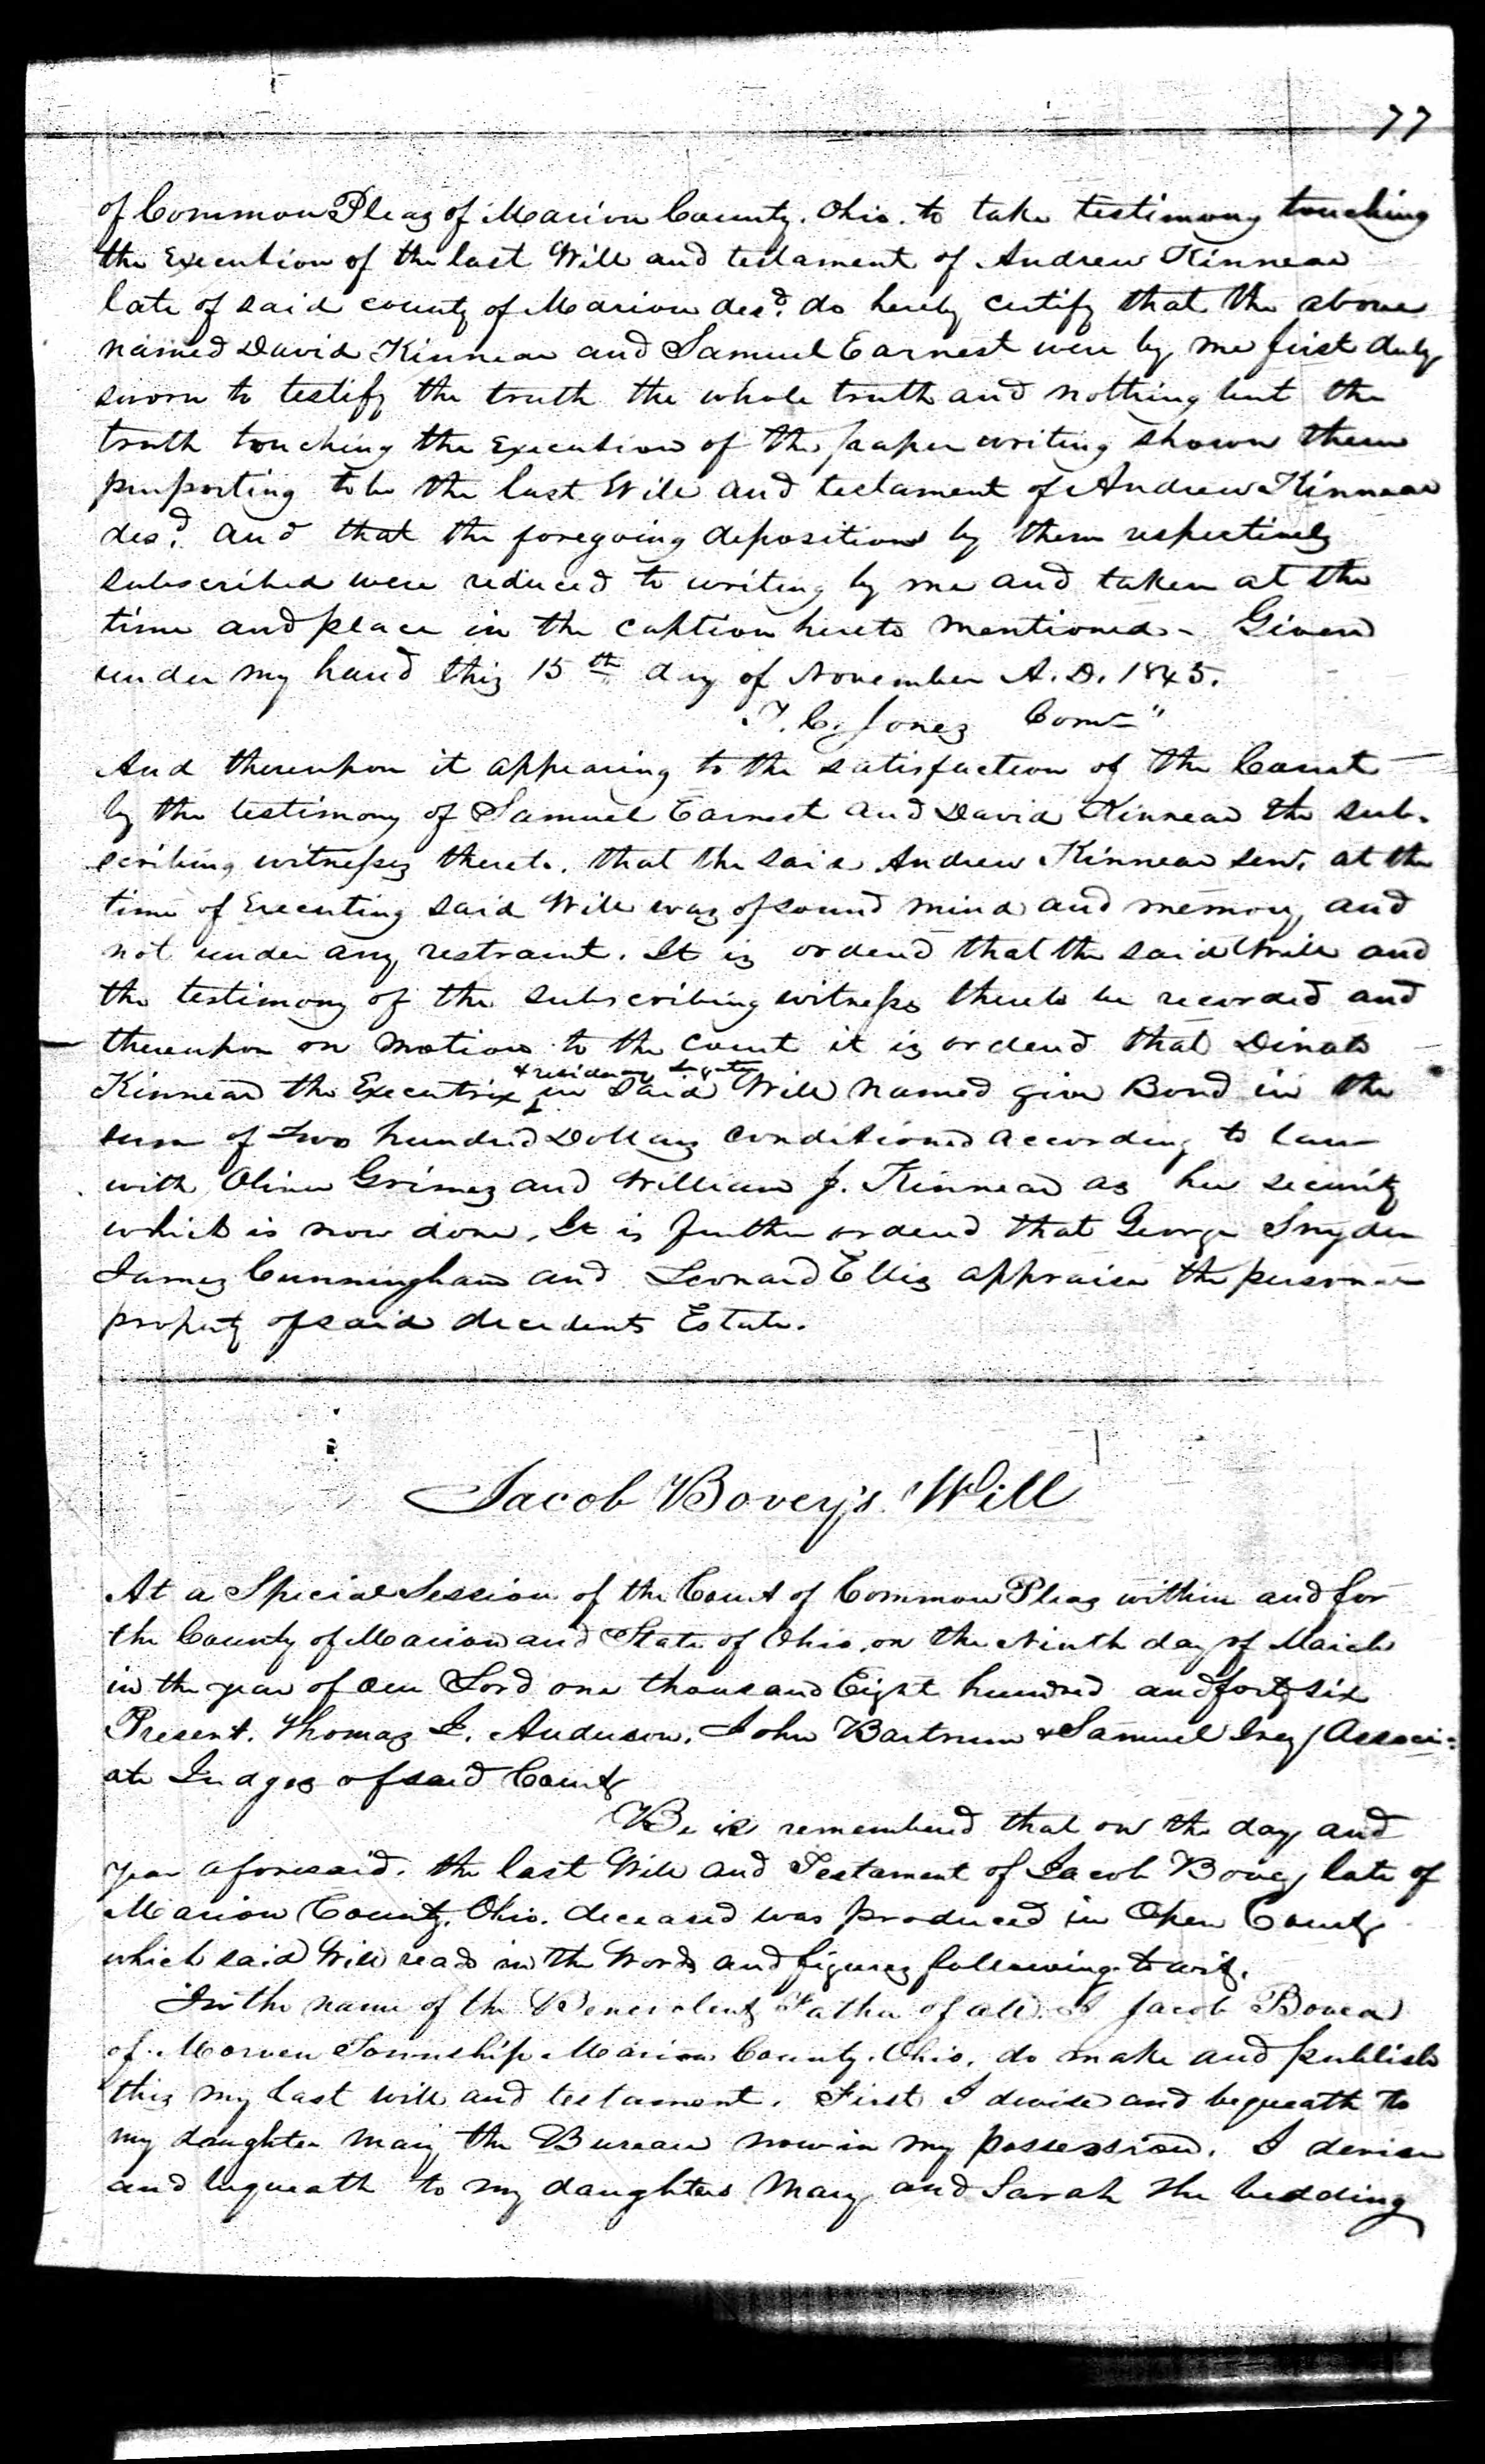 Jacob Bovey's Will, page 1 of 3